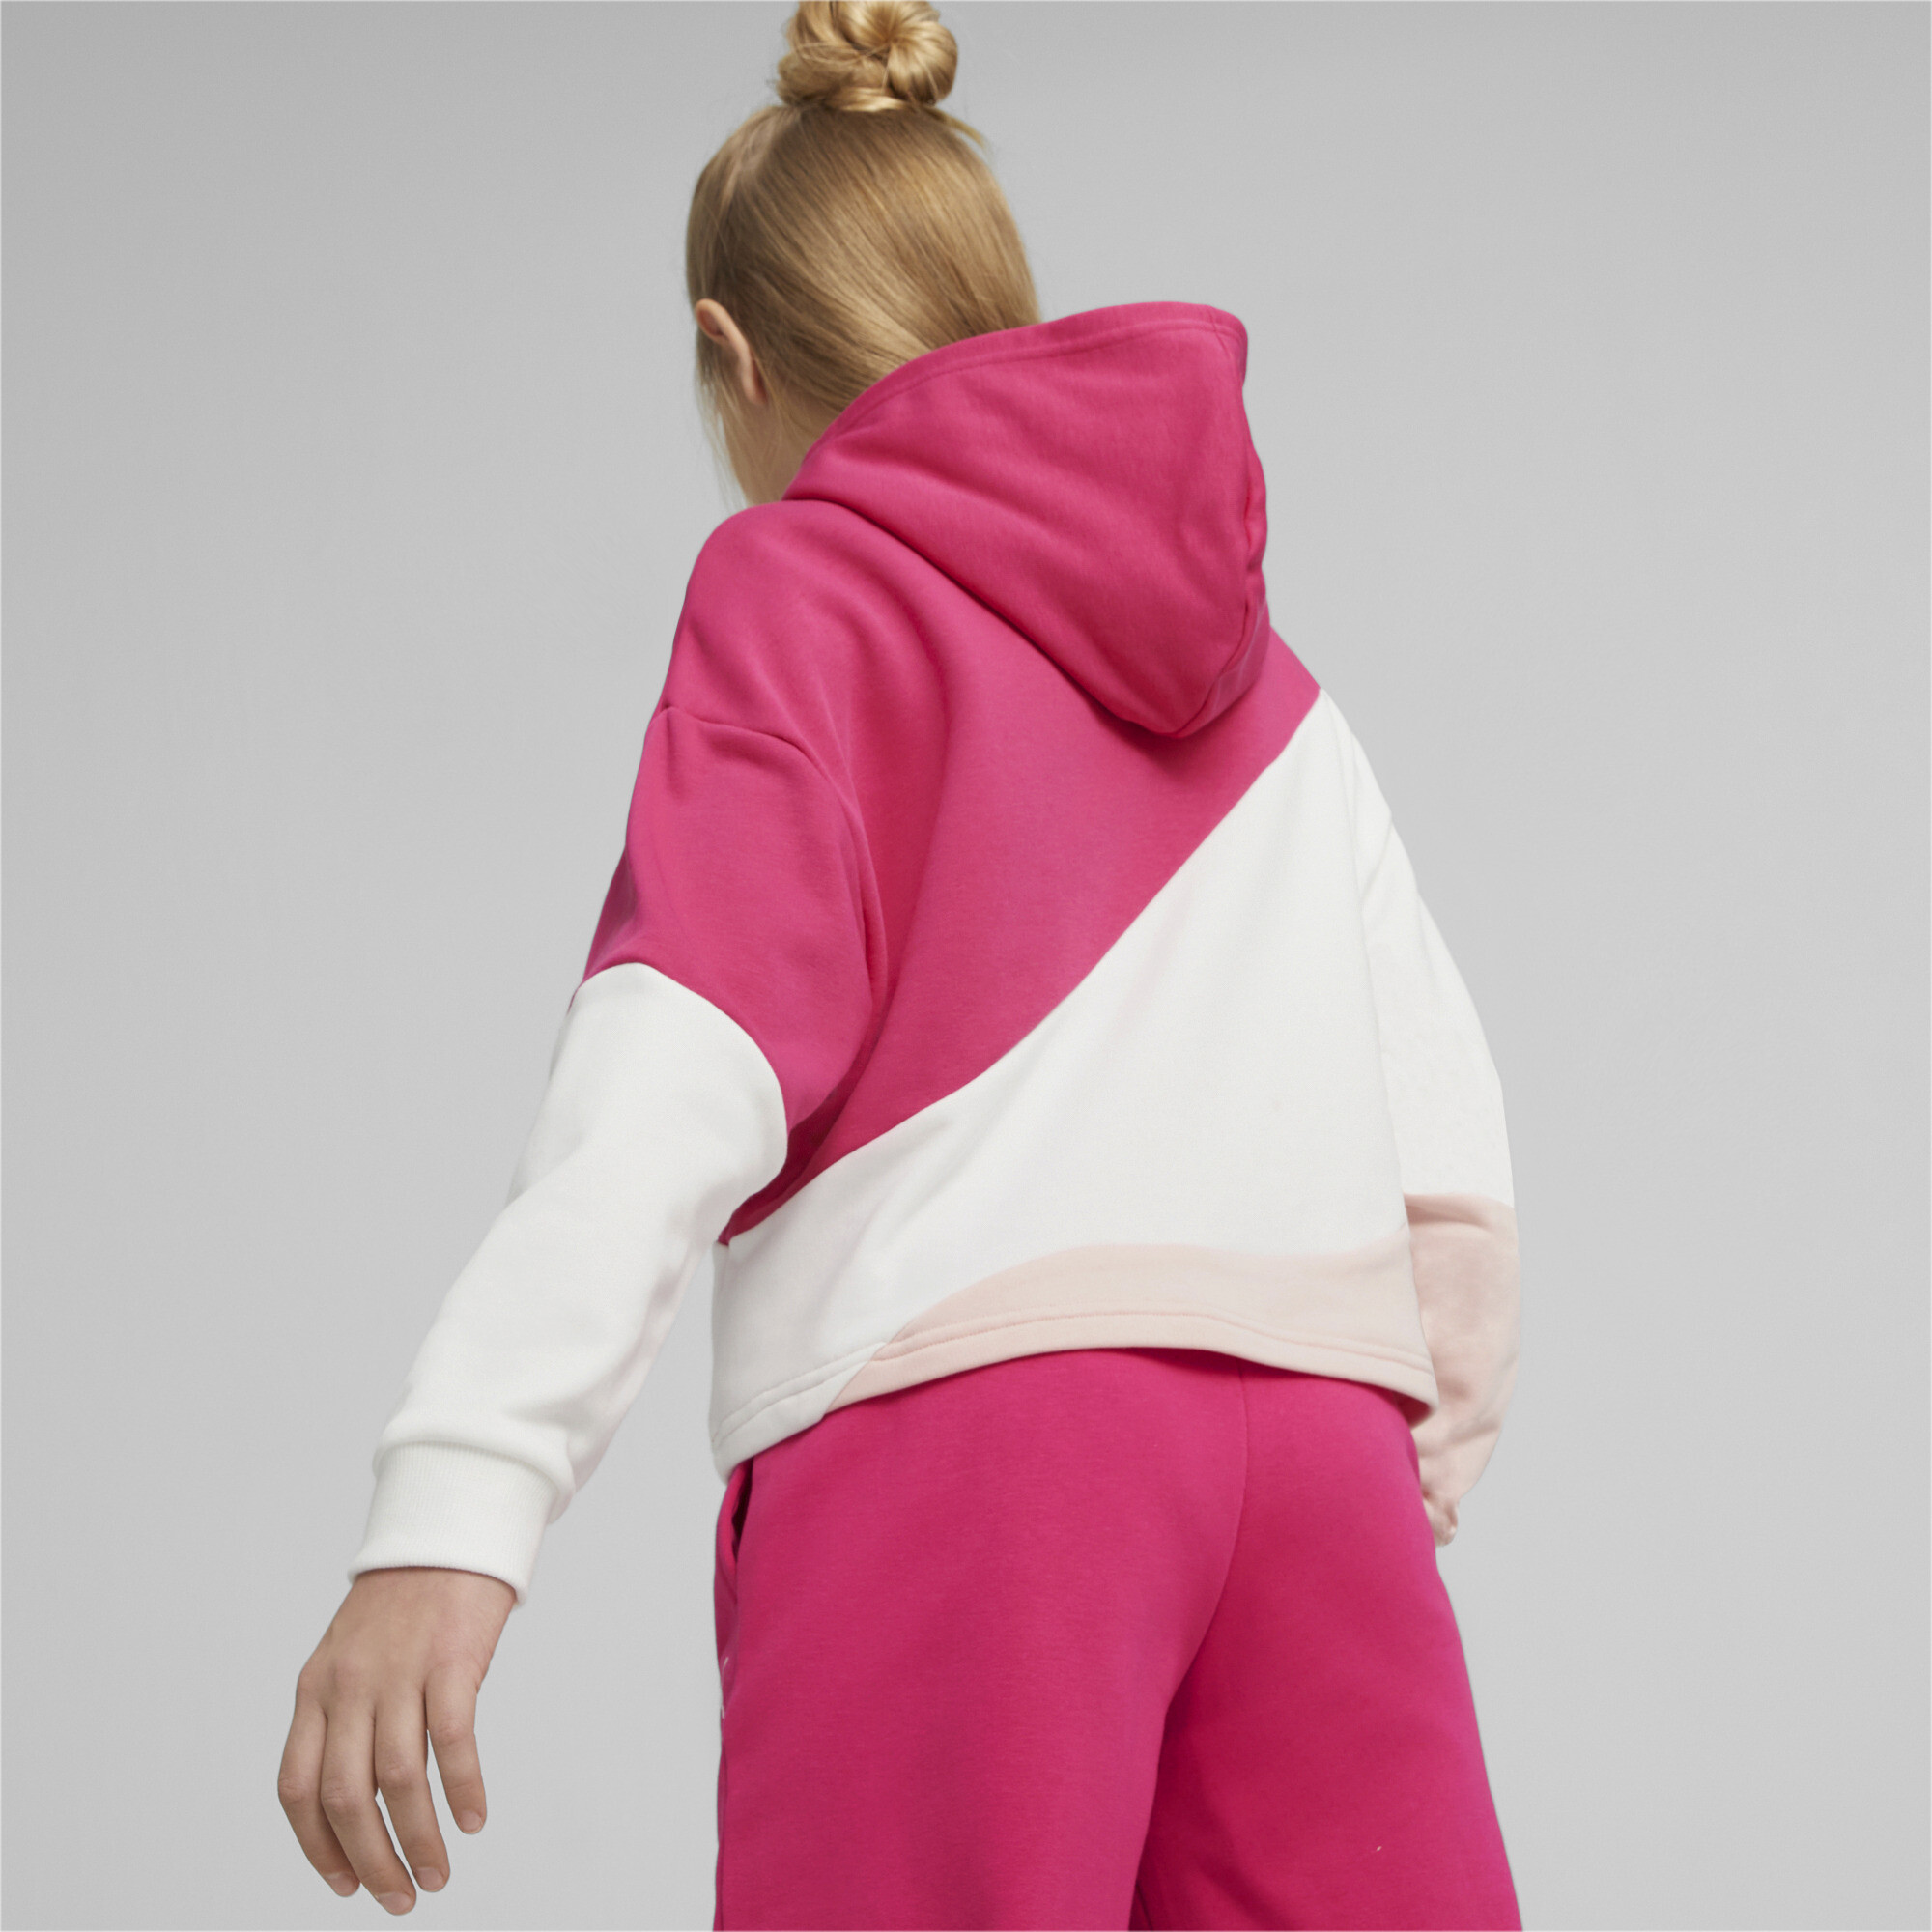 PUMA Power Cat Hoodie In Pink, Size 13-14 Youth